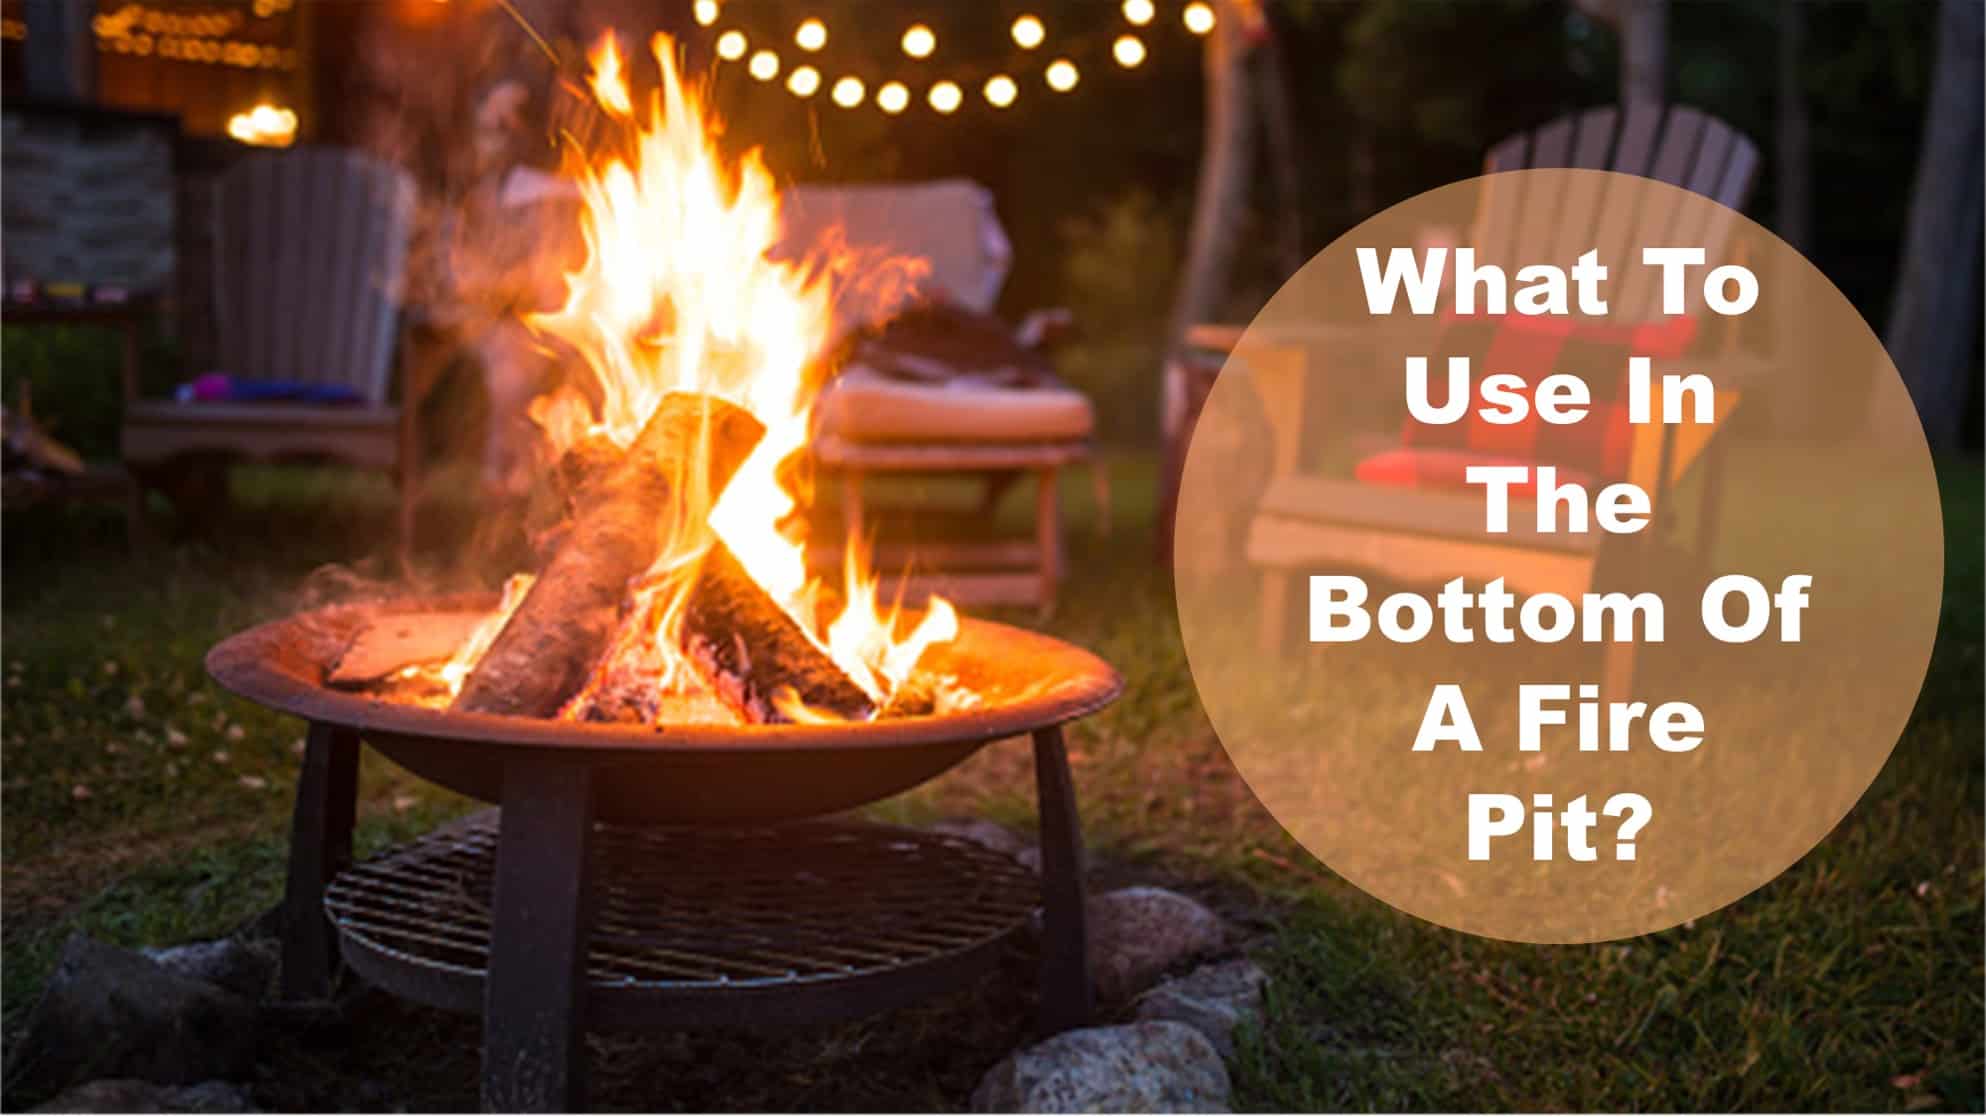 What To Use In The Bottom Of A Fire Pit, What Is The Best Material To Use For A Fire Pit